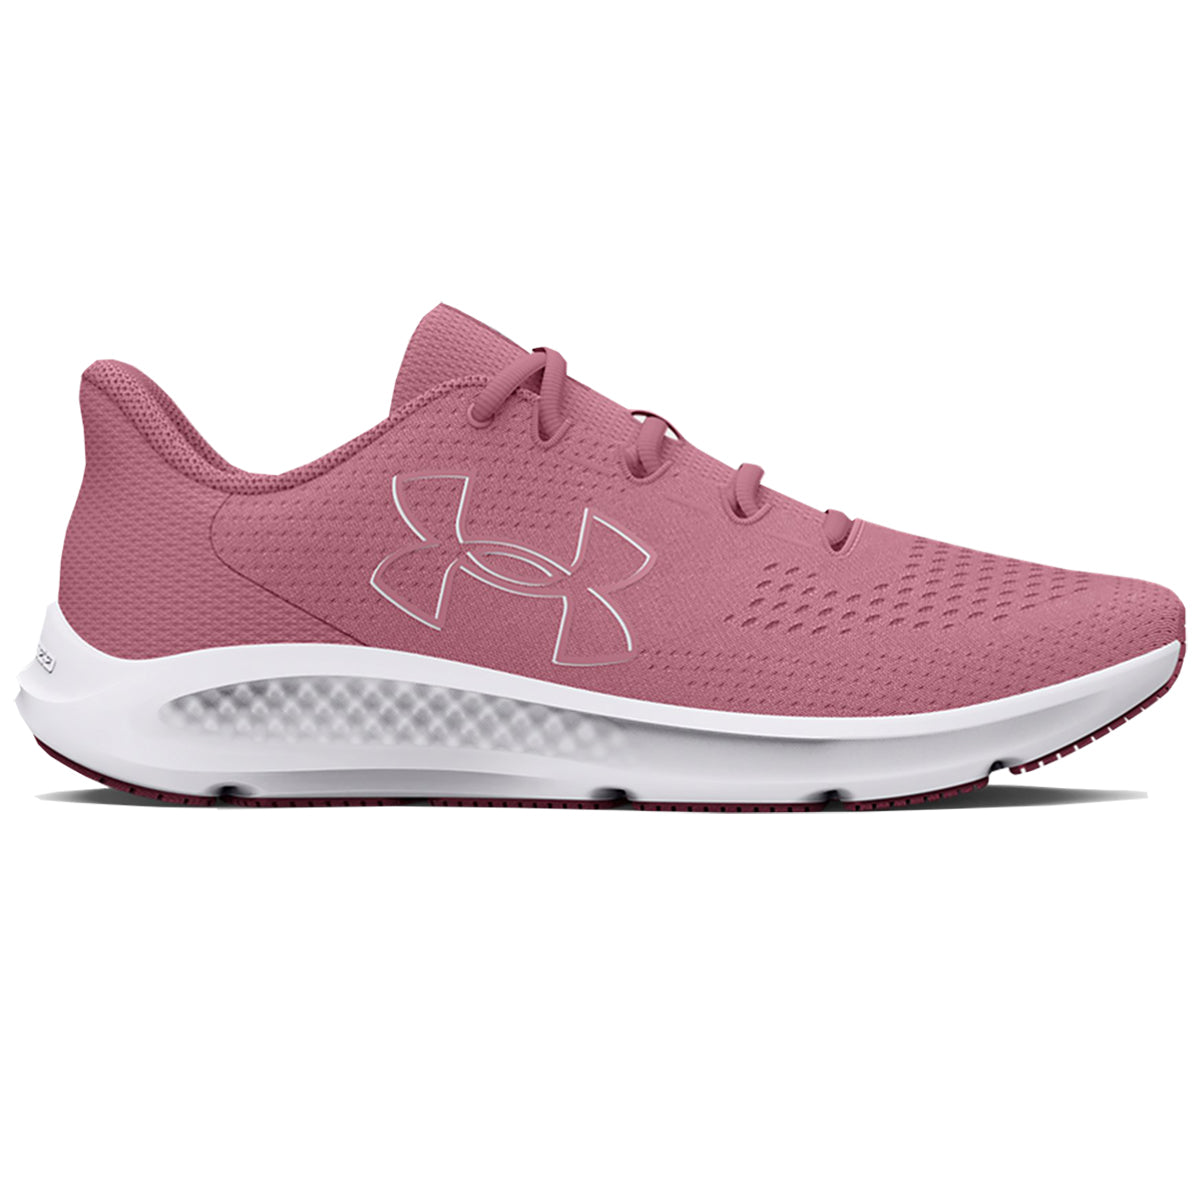 Under Armour Women's Pursuit 3 Low Top Running Shoes